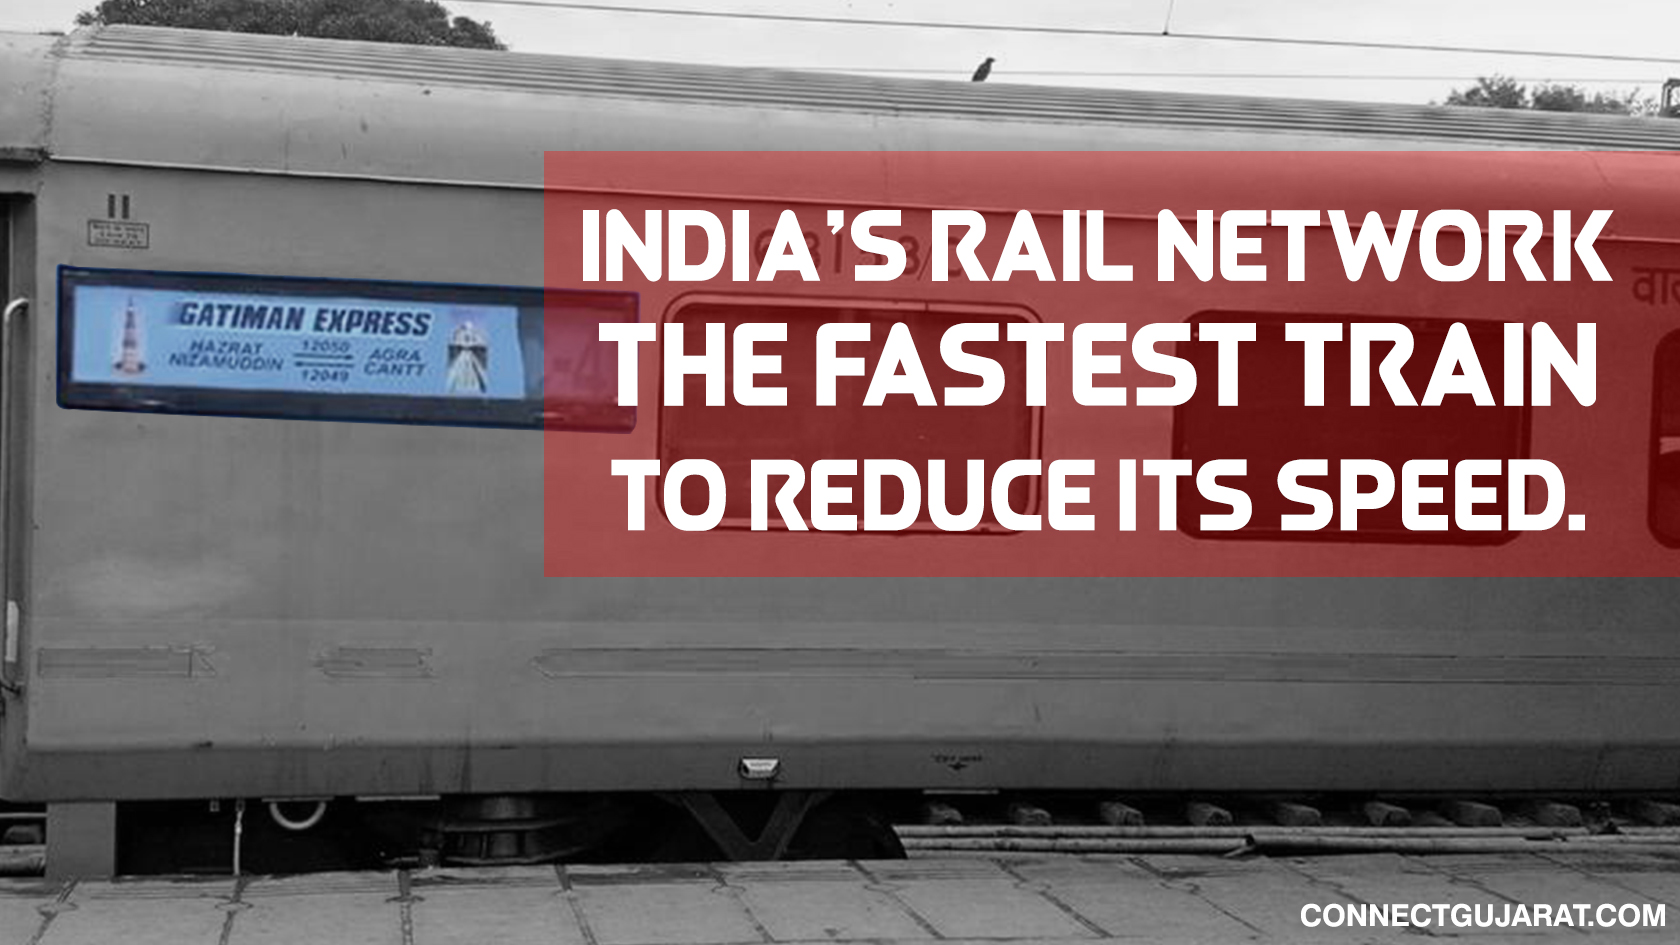 India’s rail network, the fastest train to reduce its speed